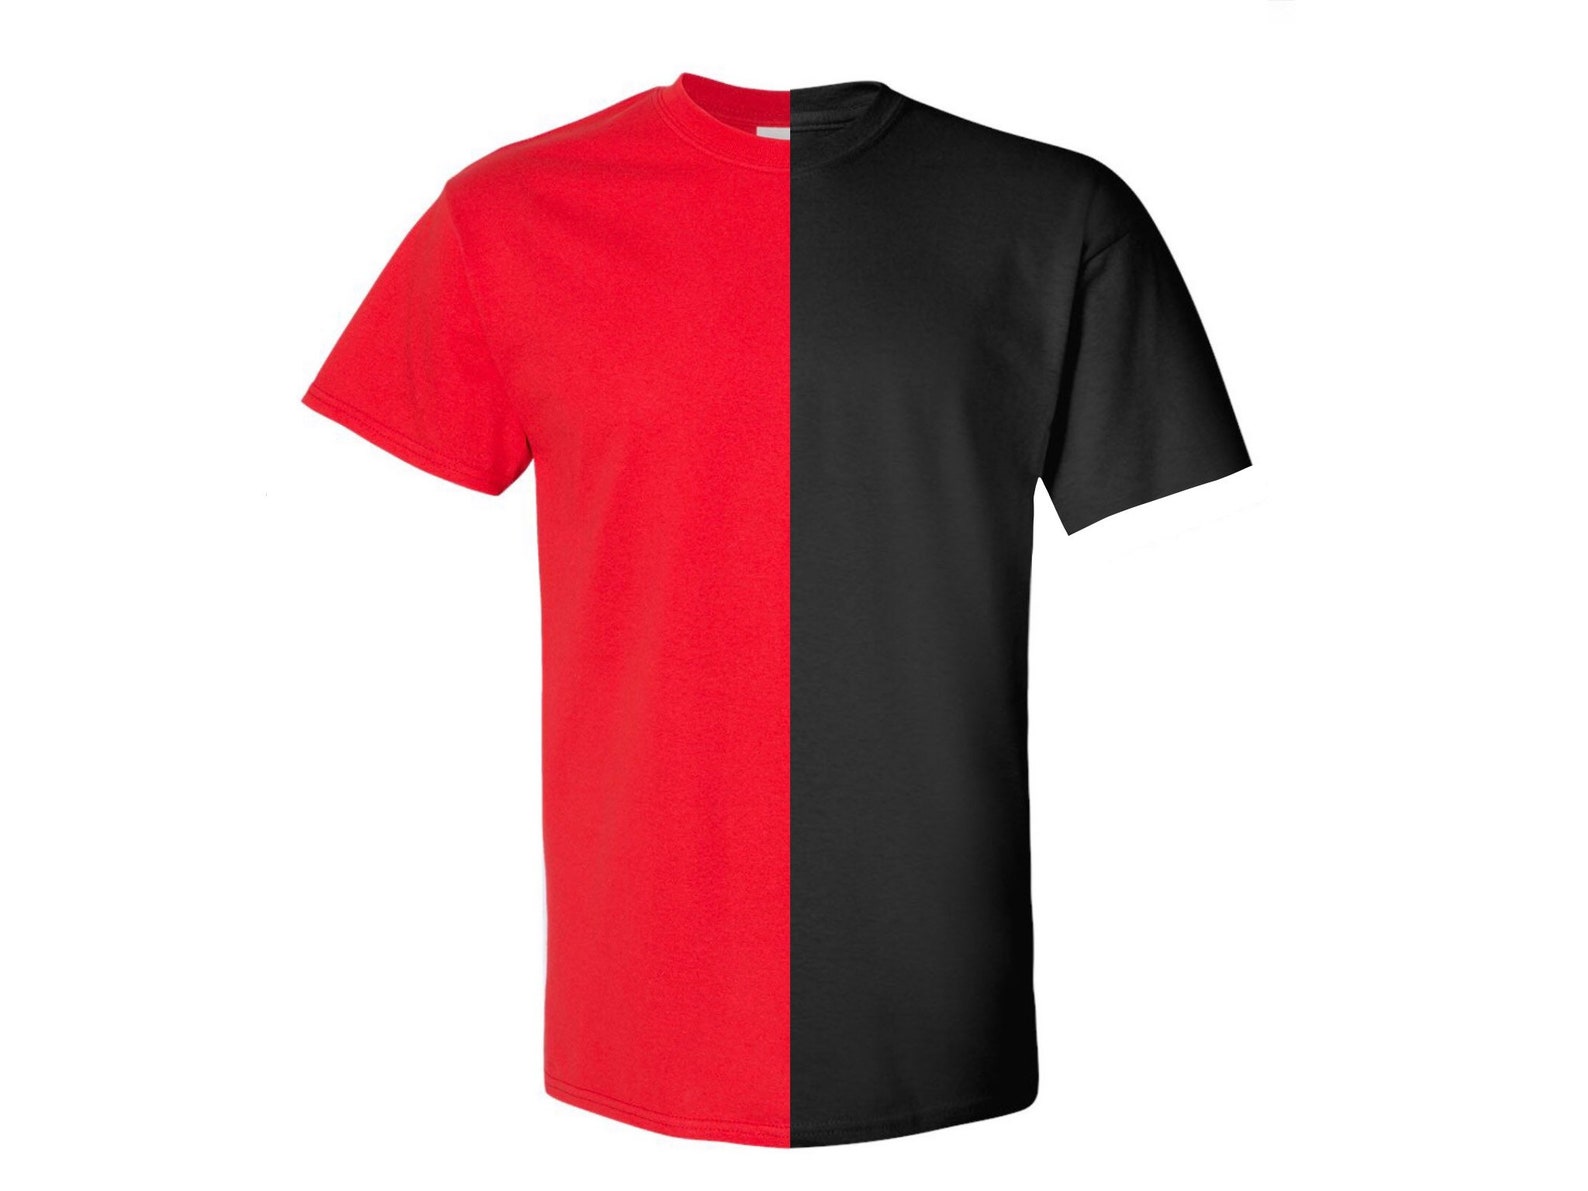 Black and Red Split Adult Tee Two-toned Shirt Two-colored - Etsy